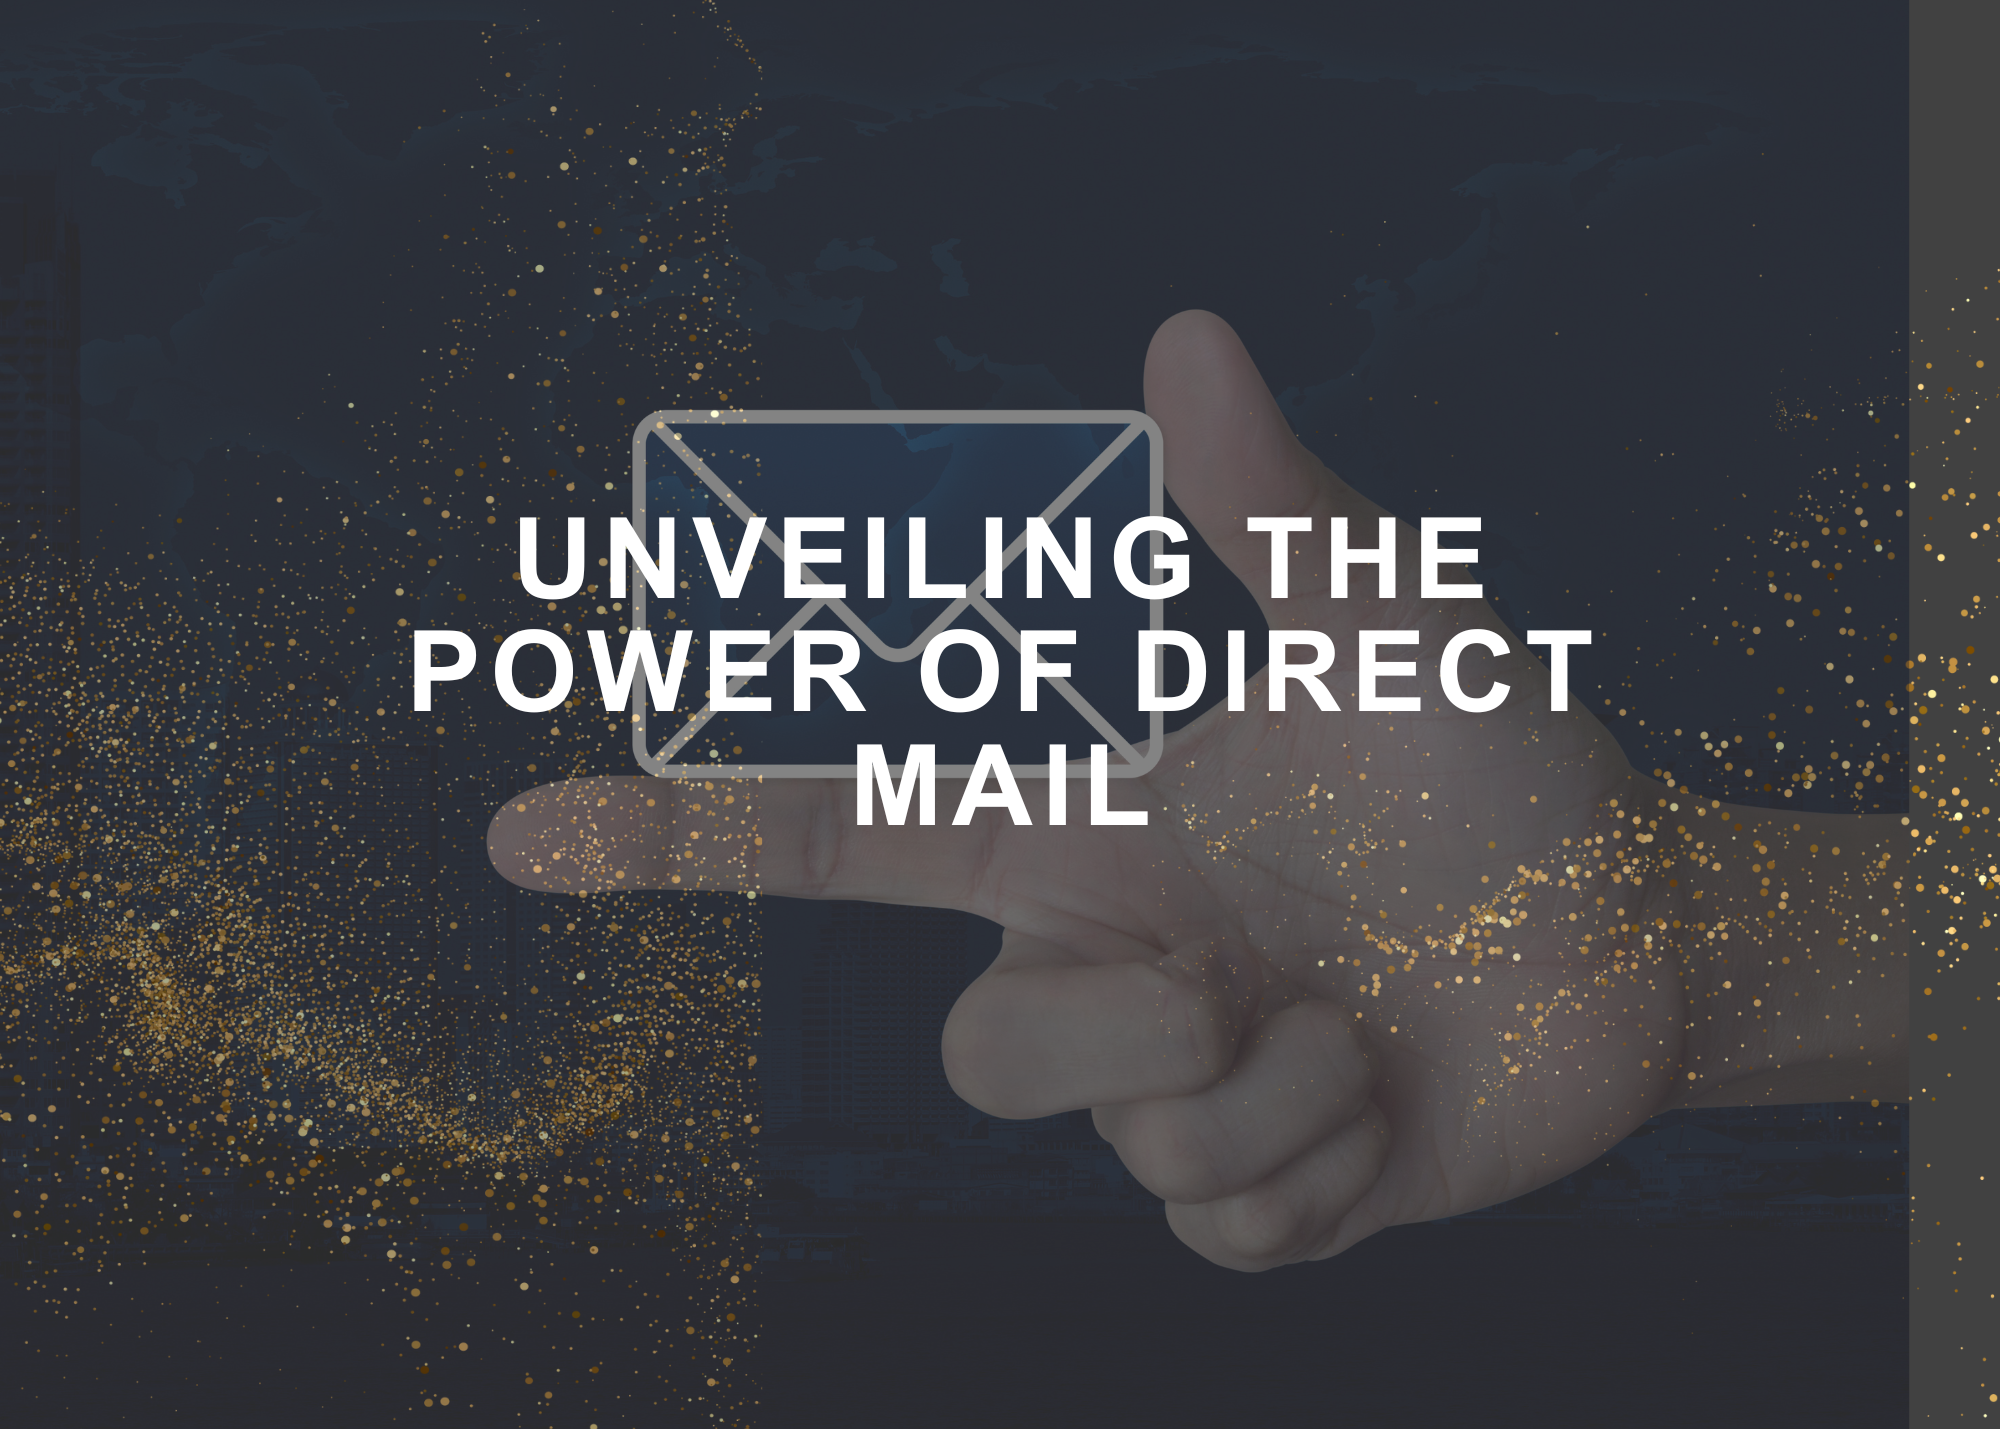 Your Brand Experienced: Unveiling the Power of Direct Mail